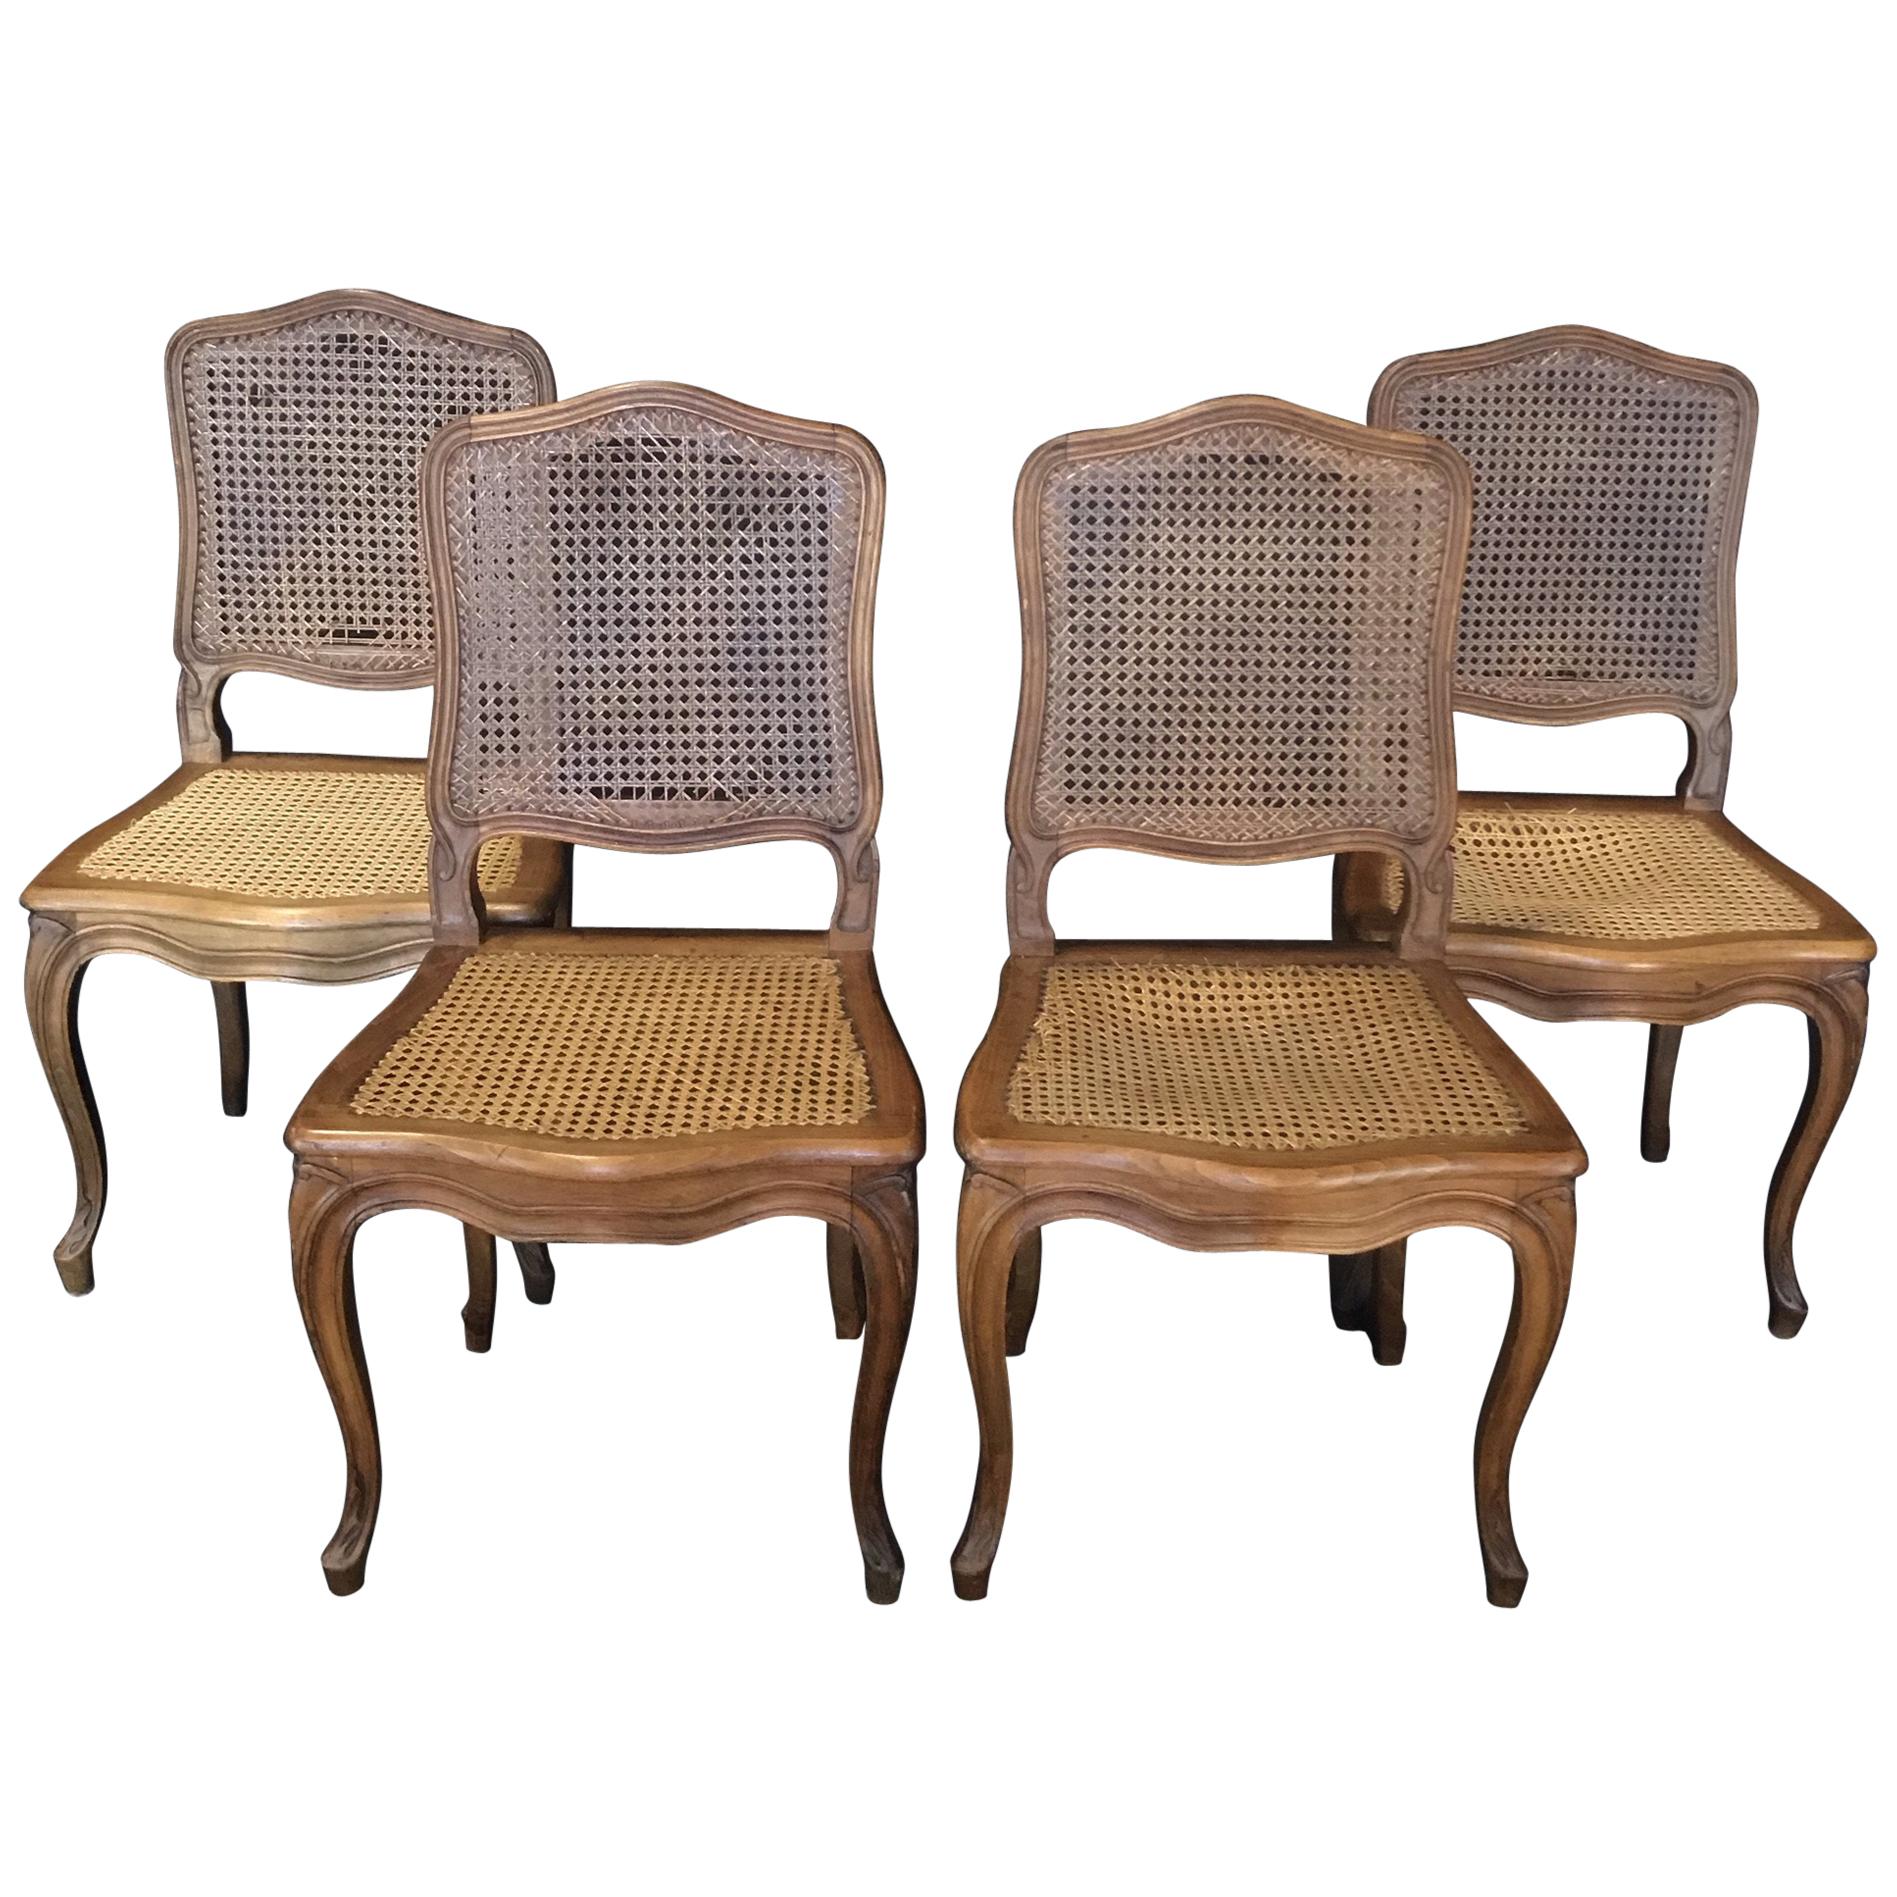 Set of 4 Classic Caned French Provincial Louis XV Style Walnut Dining Chairs